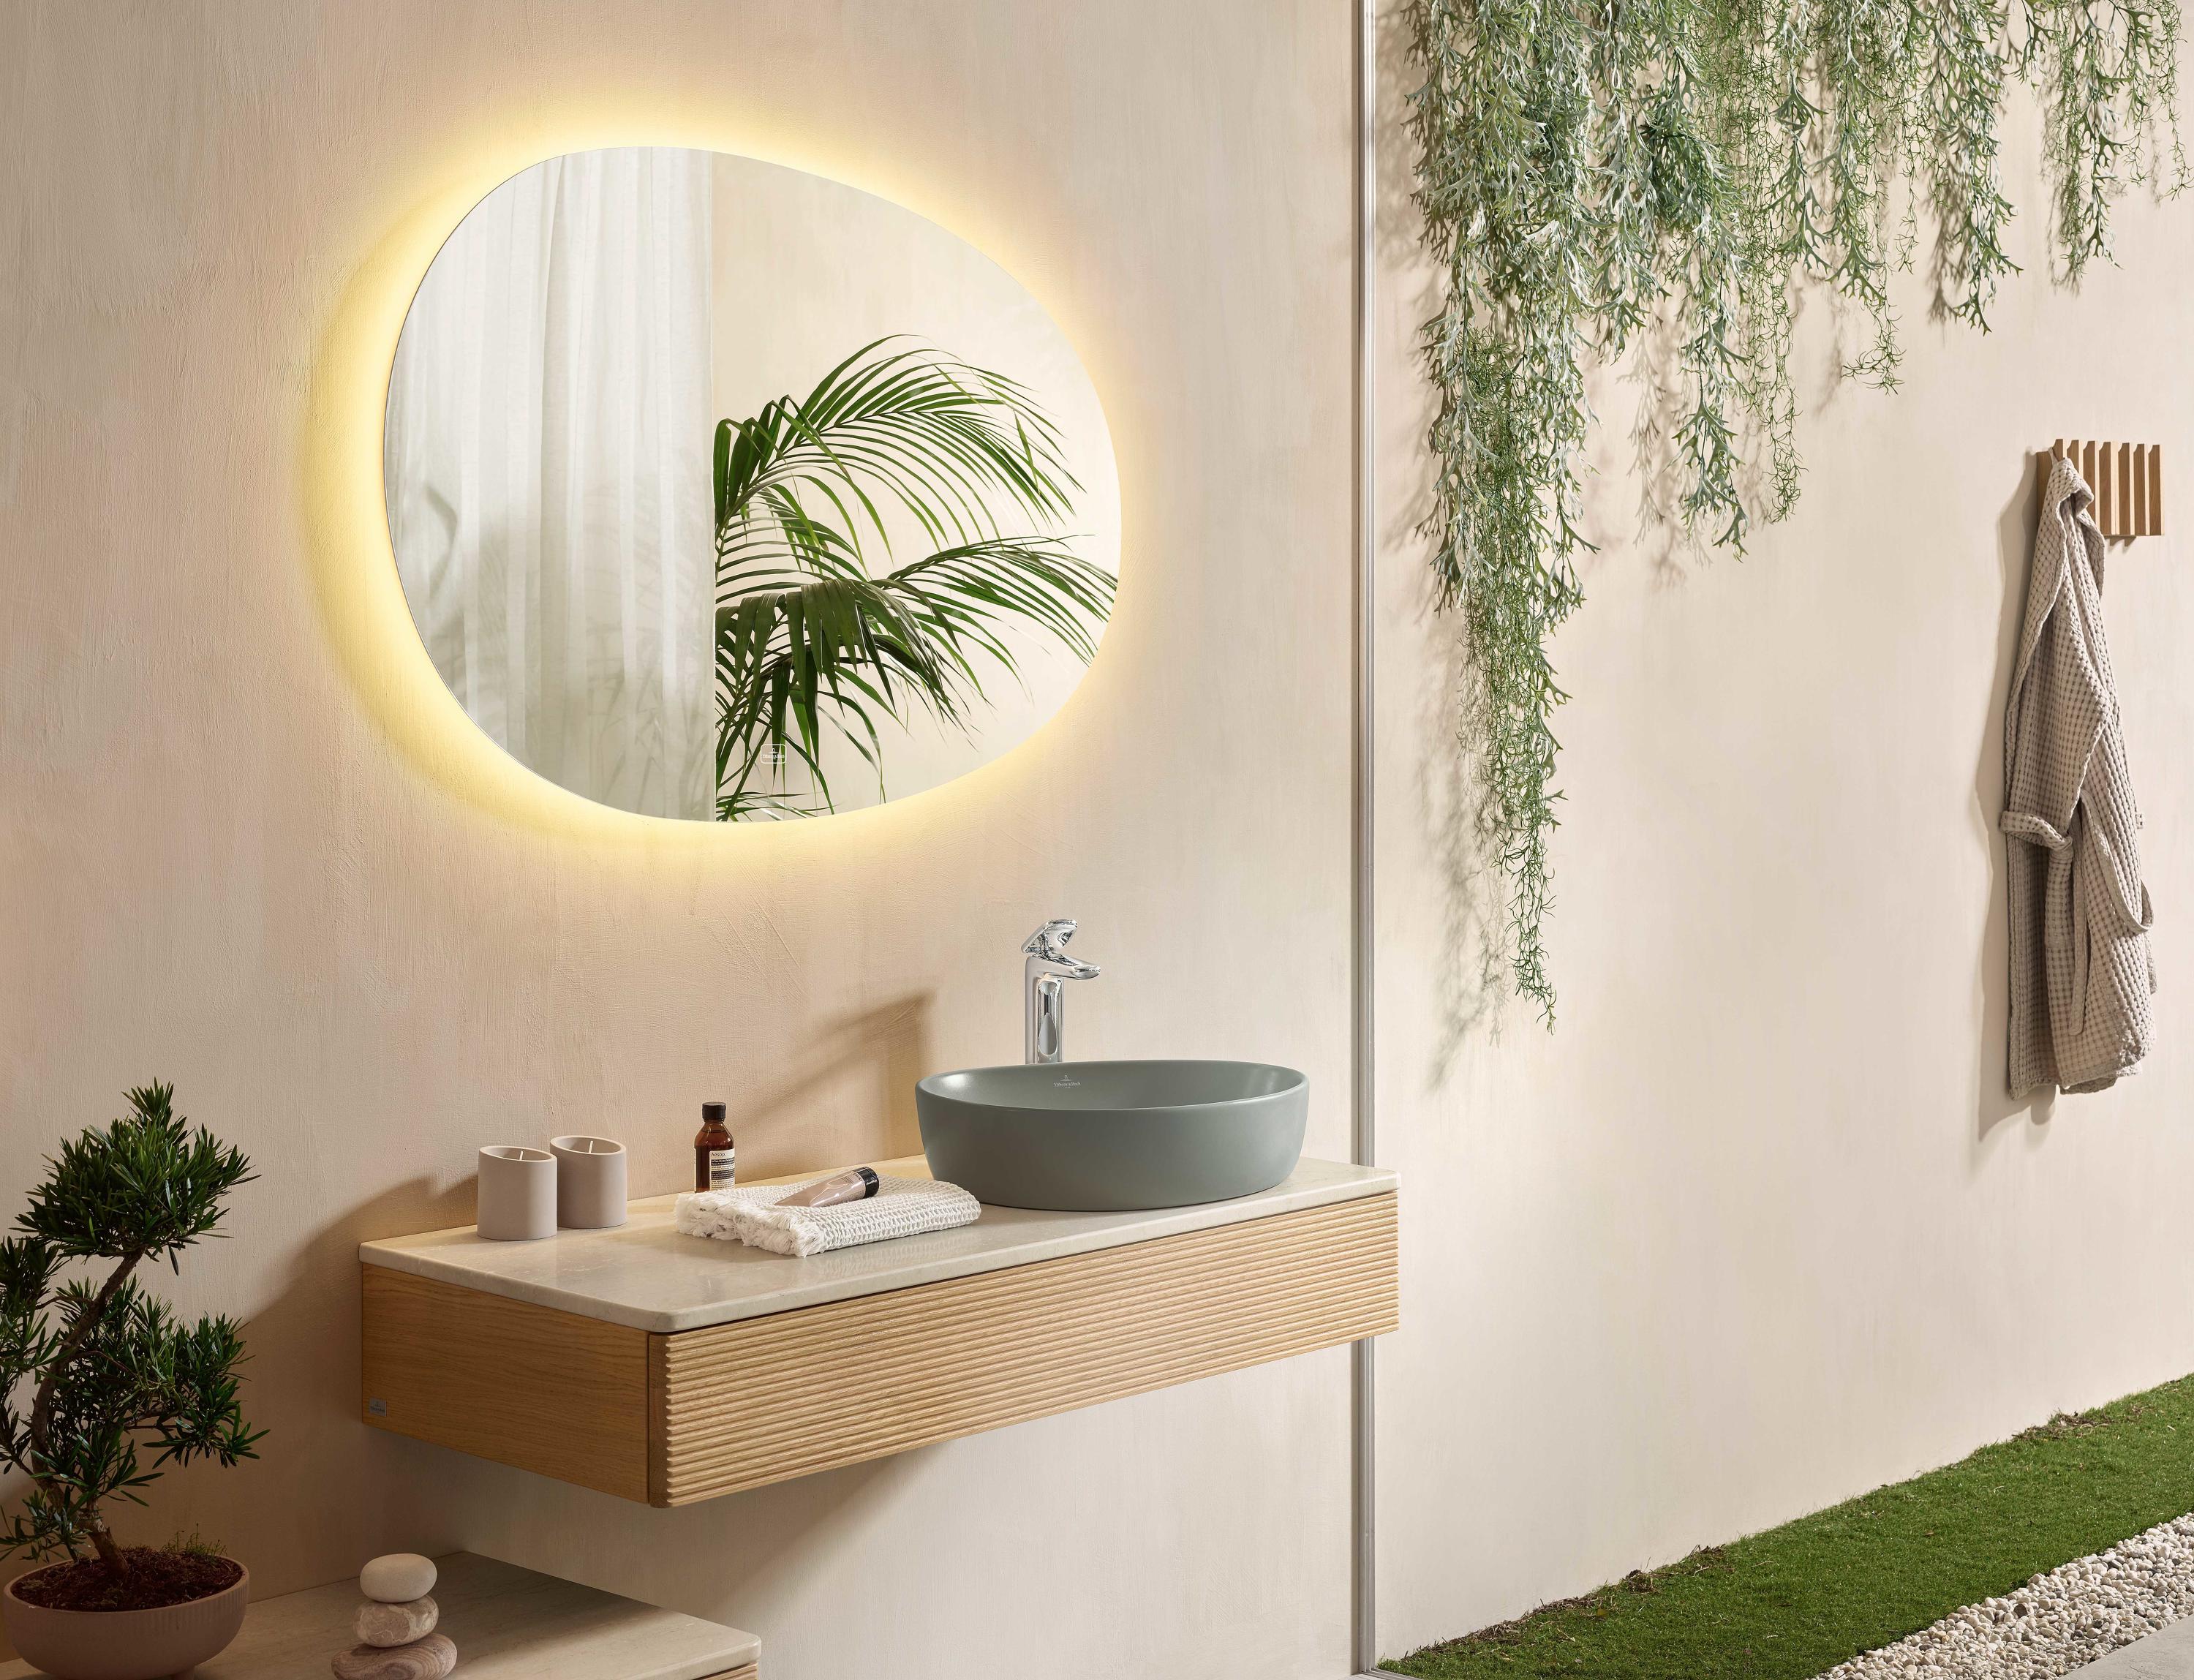 Moments of clarity: Villeroy & Boch's Antao bathroom collection by  kaschkasch